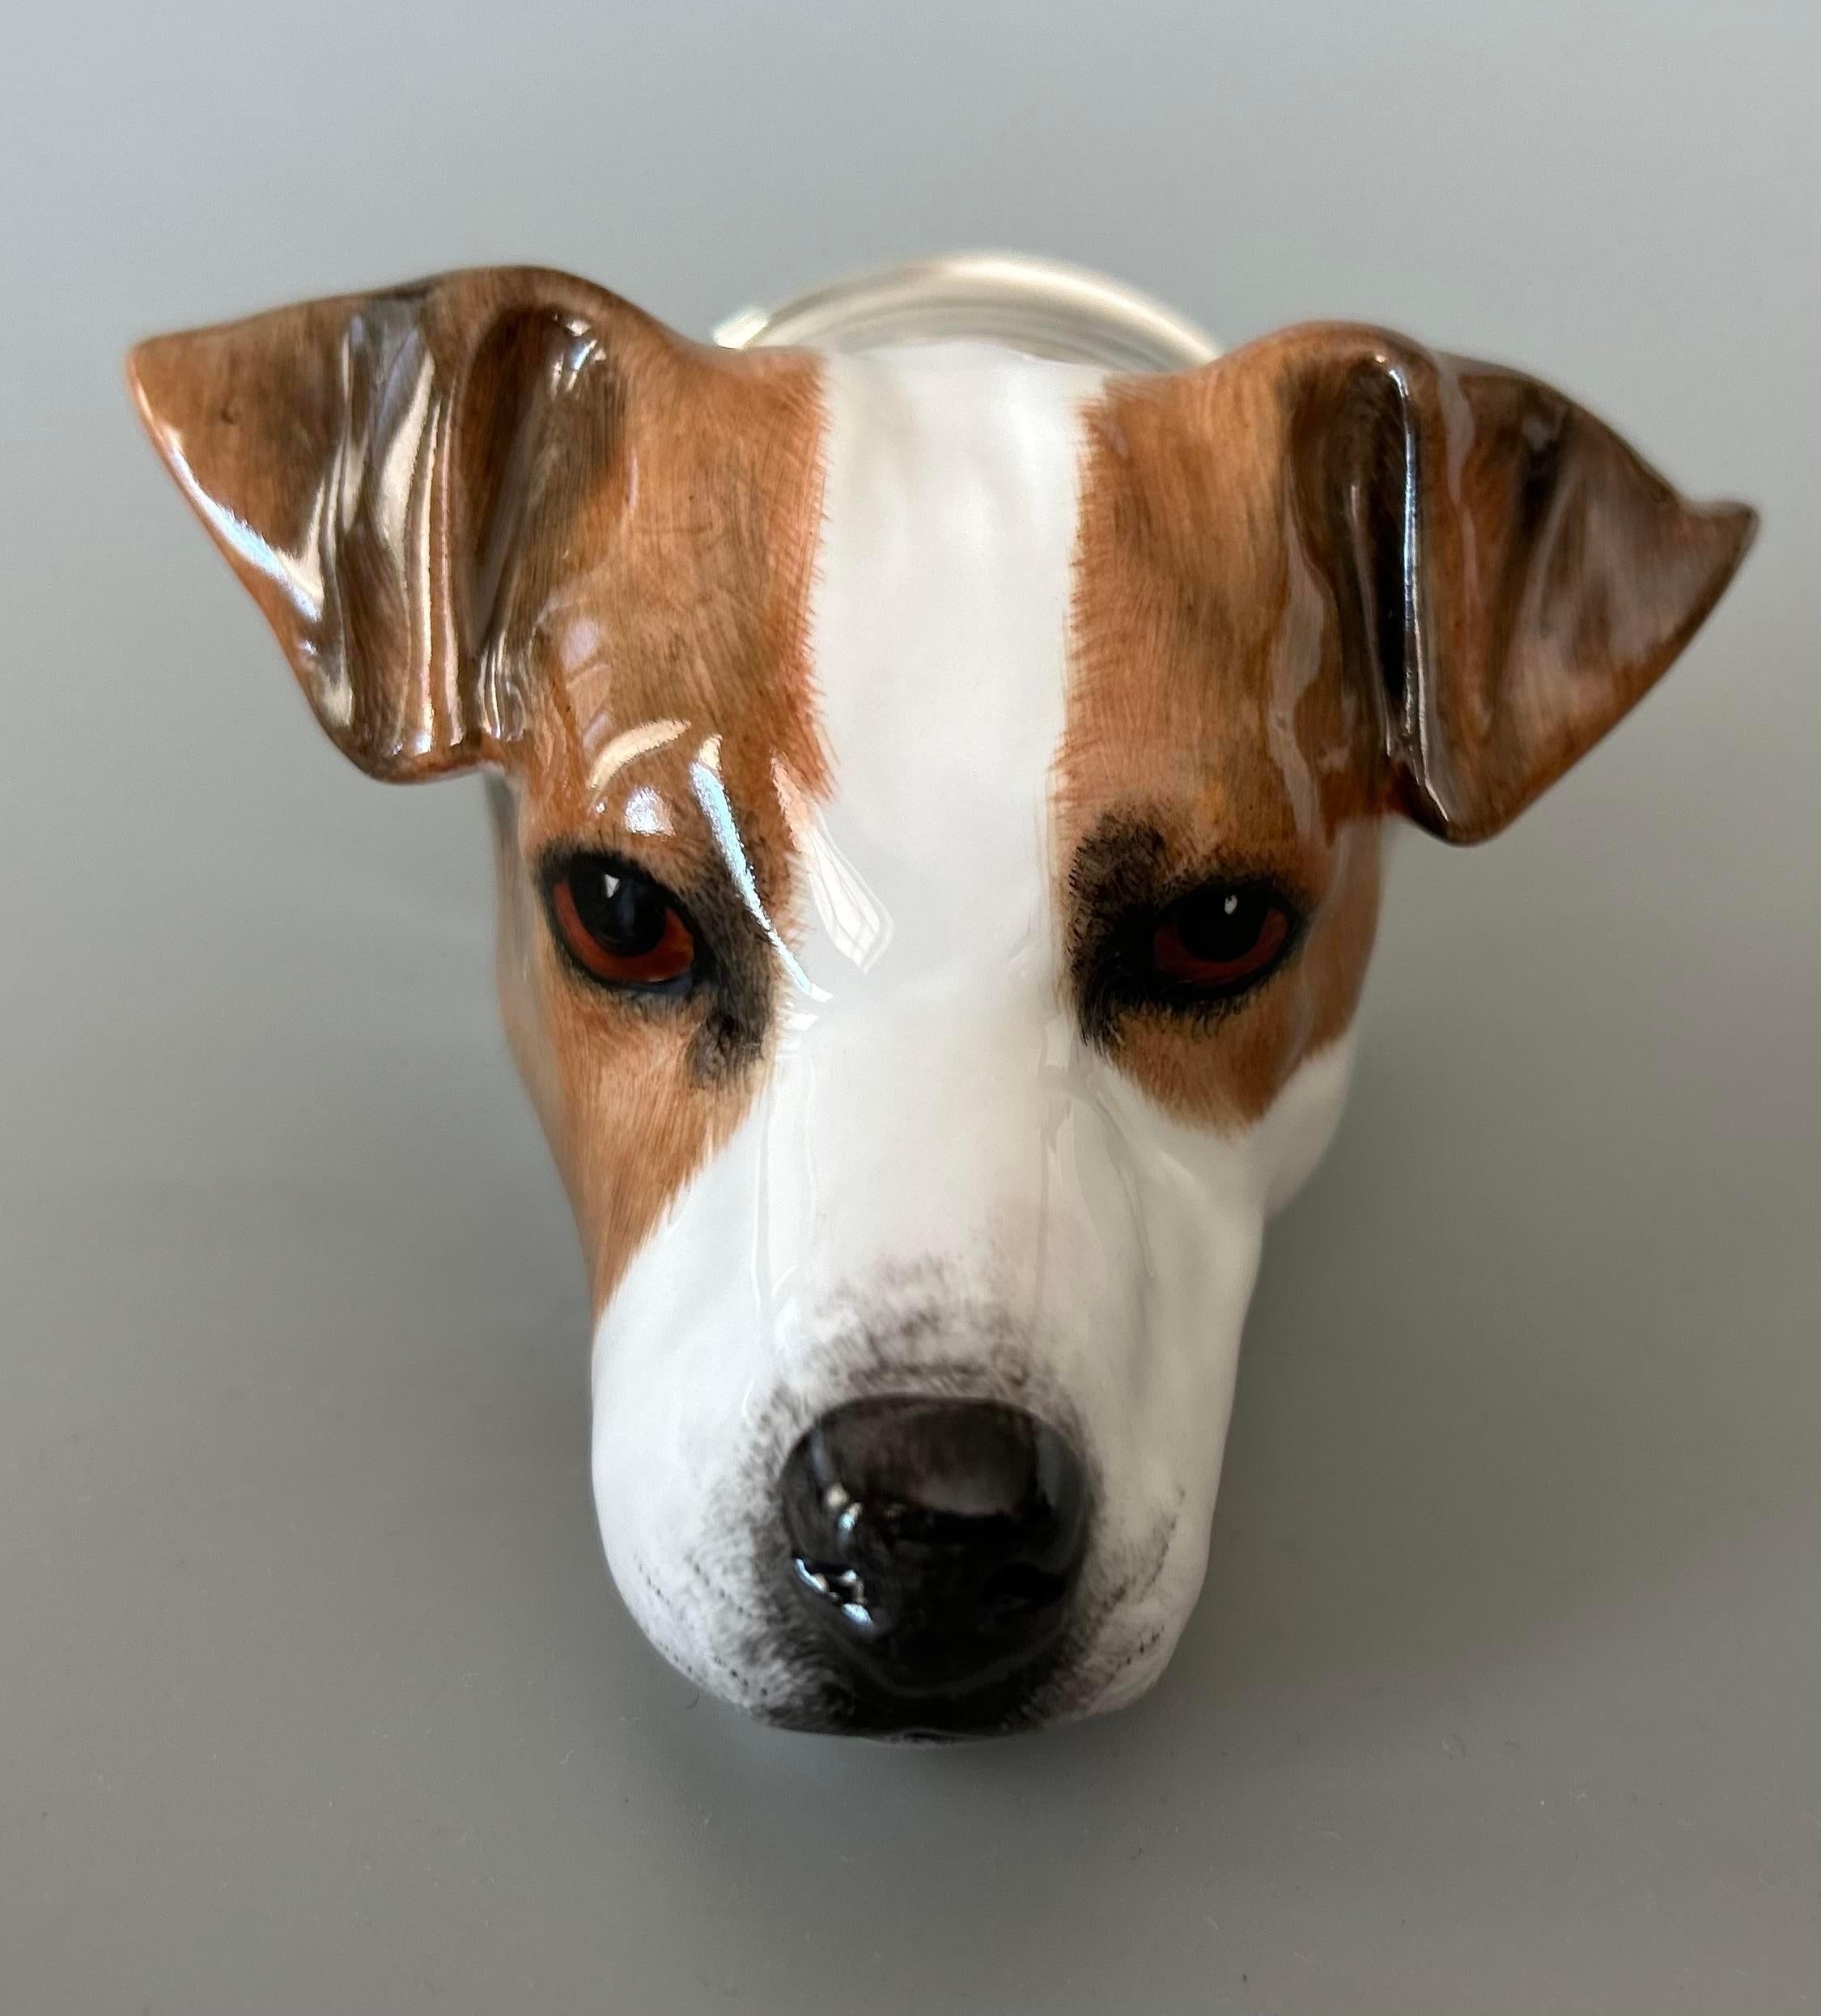 A fine rare vintage English Staffordshire Jack Russell Terrier hunting dog porcelain stirrup cup produced by Royale Stratford, in England. Acquired from a collector's estate in England. This charming stirrup cup is in the form of a Jack Russell